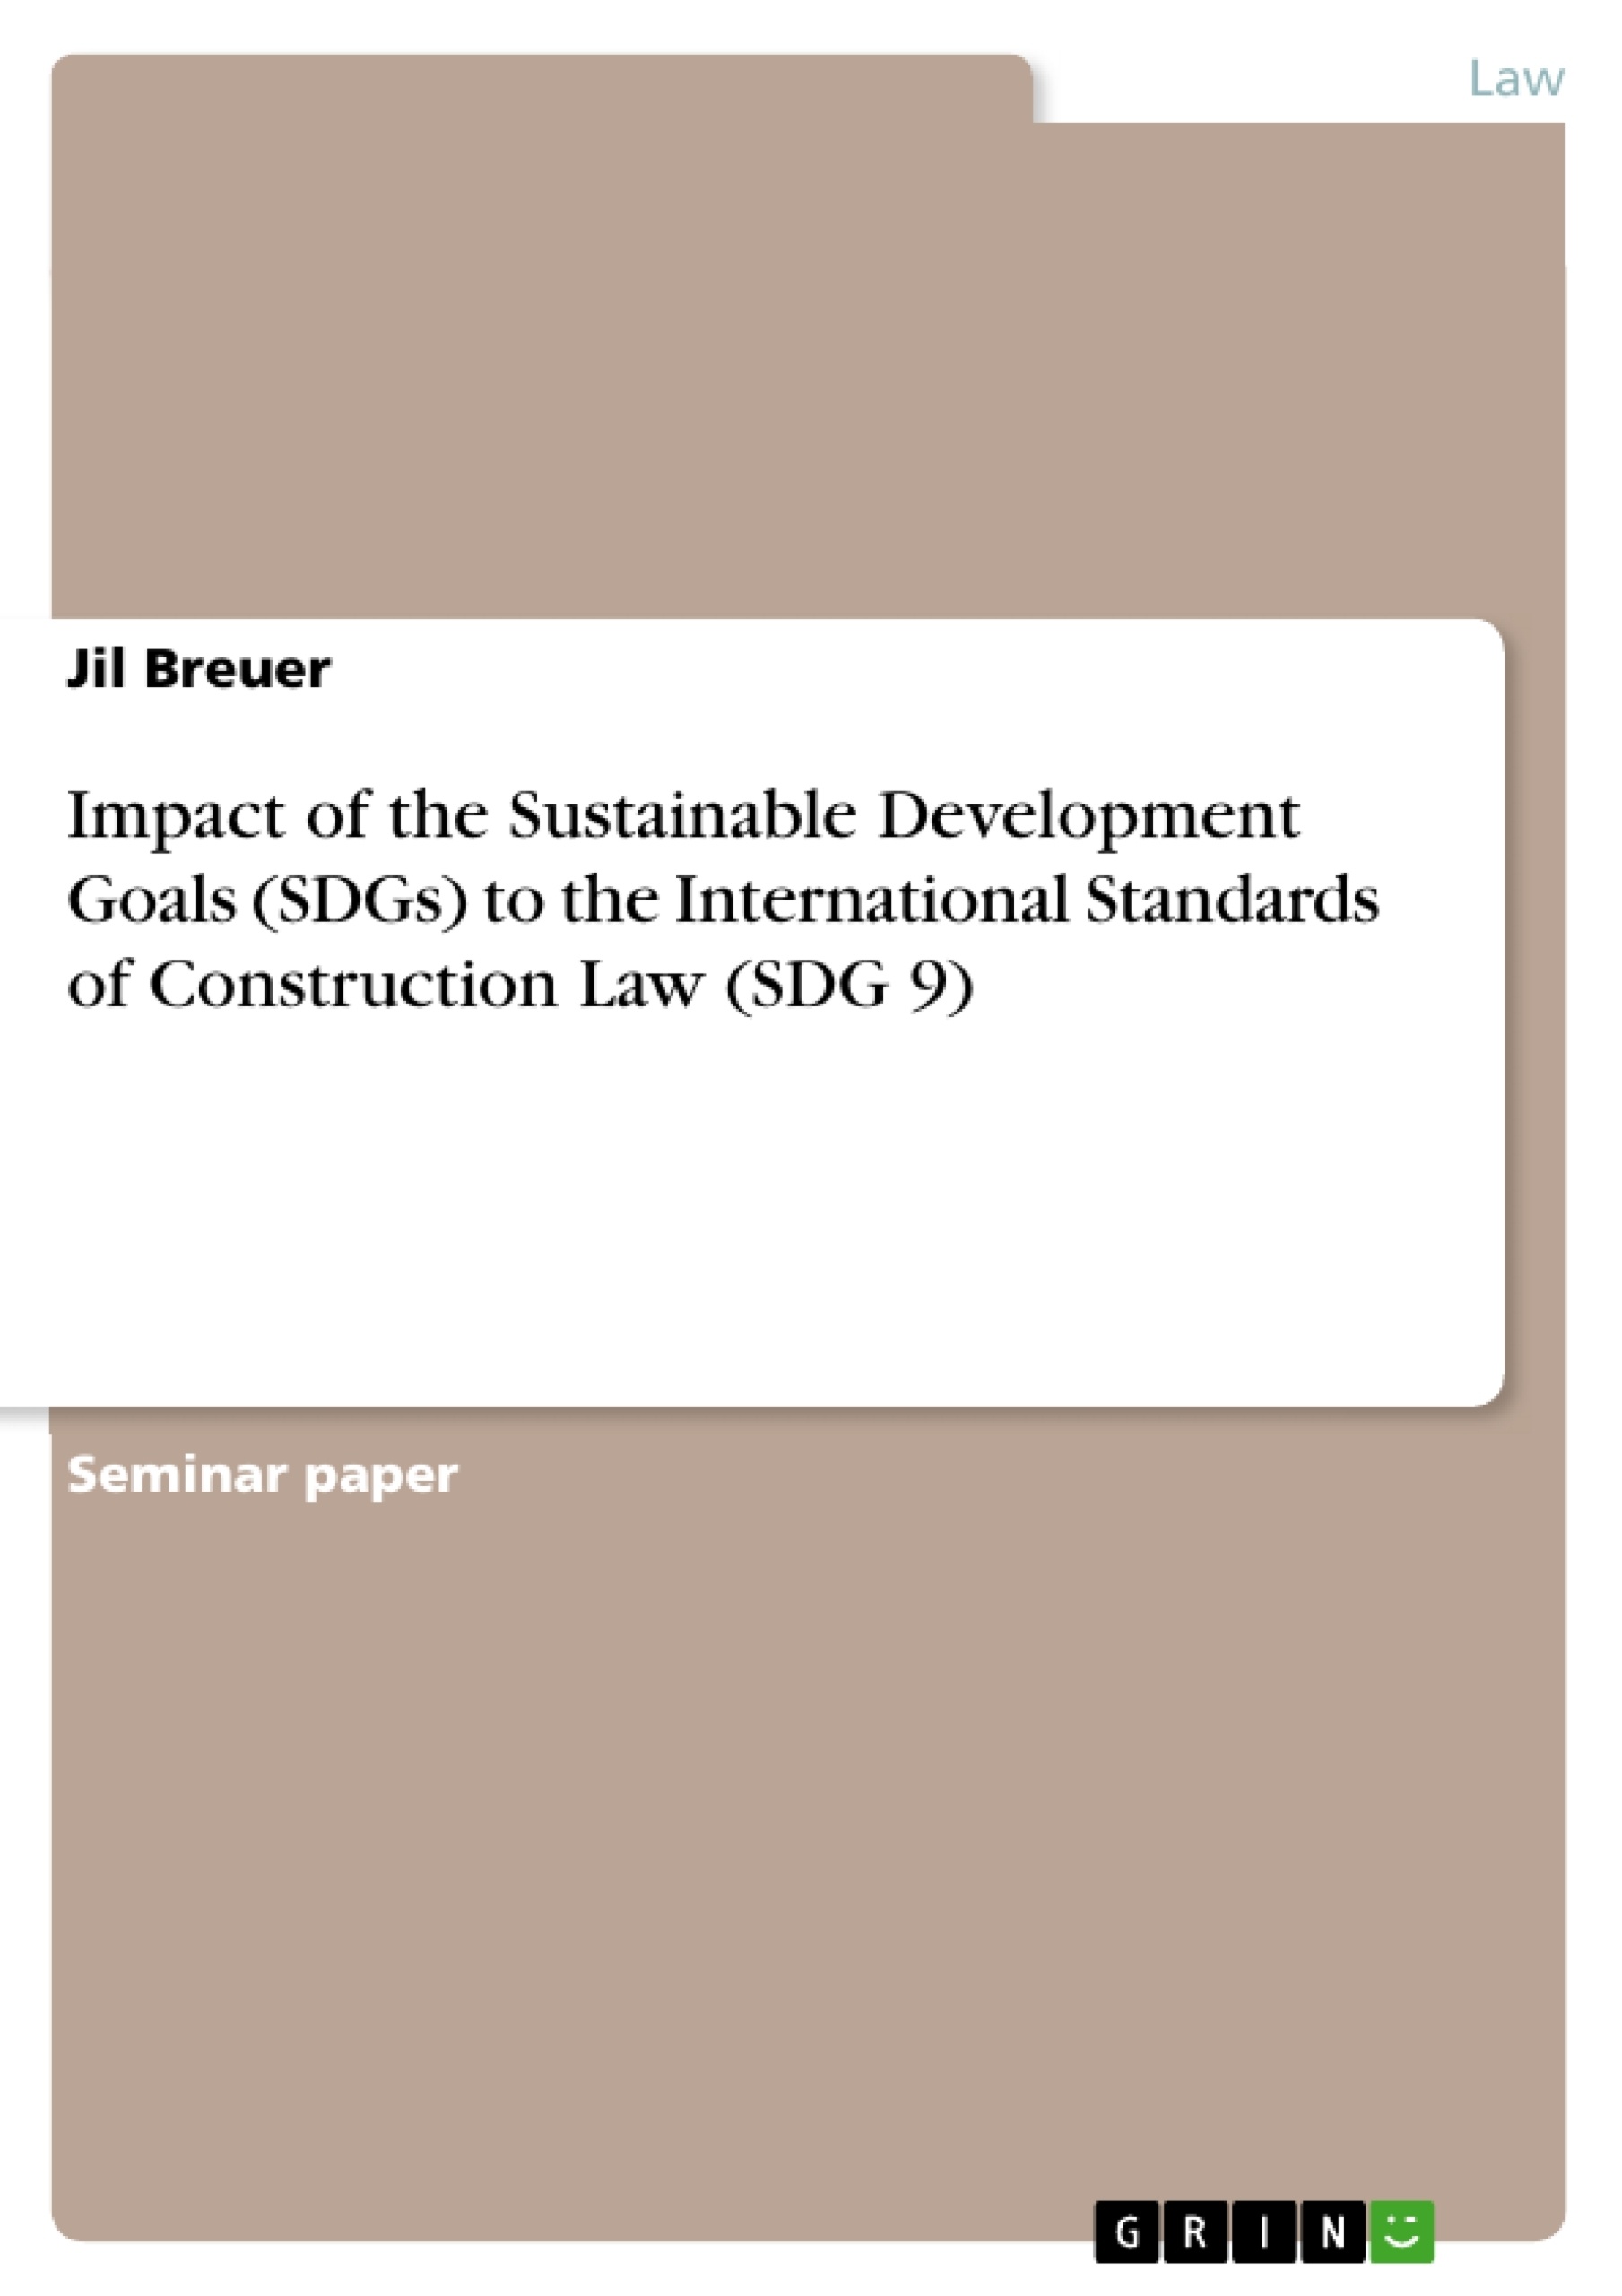 Título: Impact of the Sustainable Development Goals (SDGs) to the International Standards of Construction Law (SDG 9)